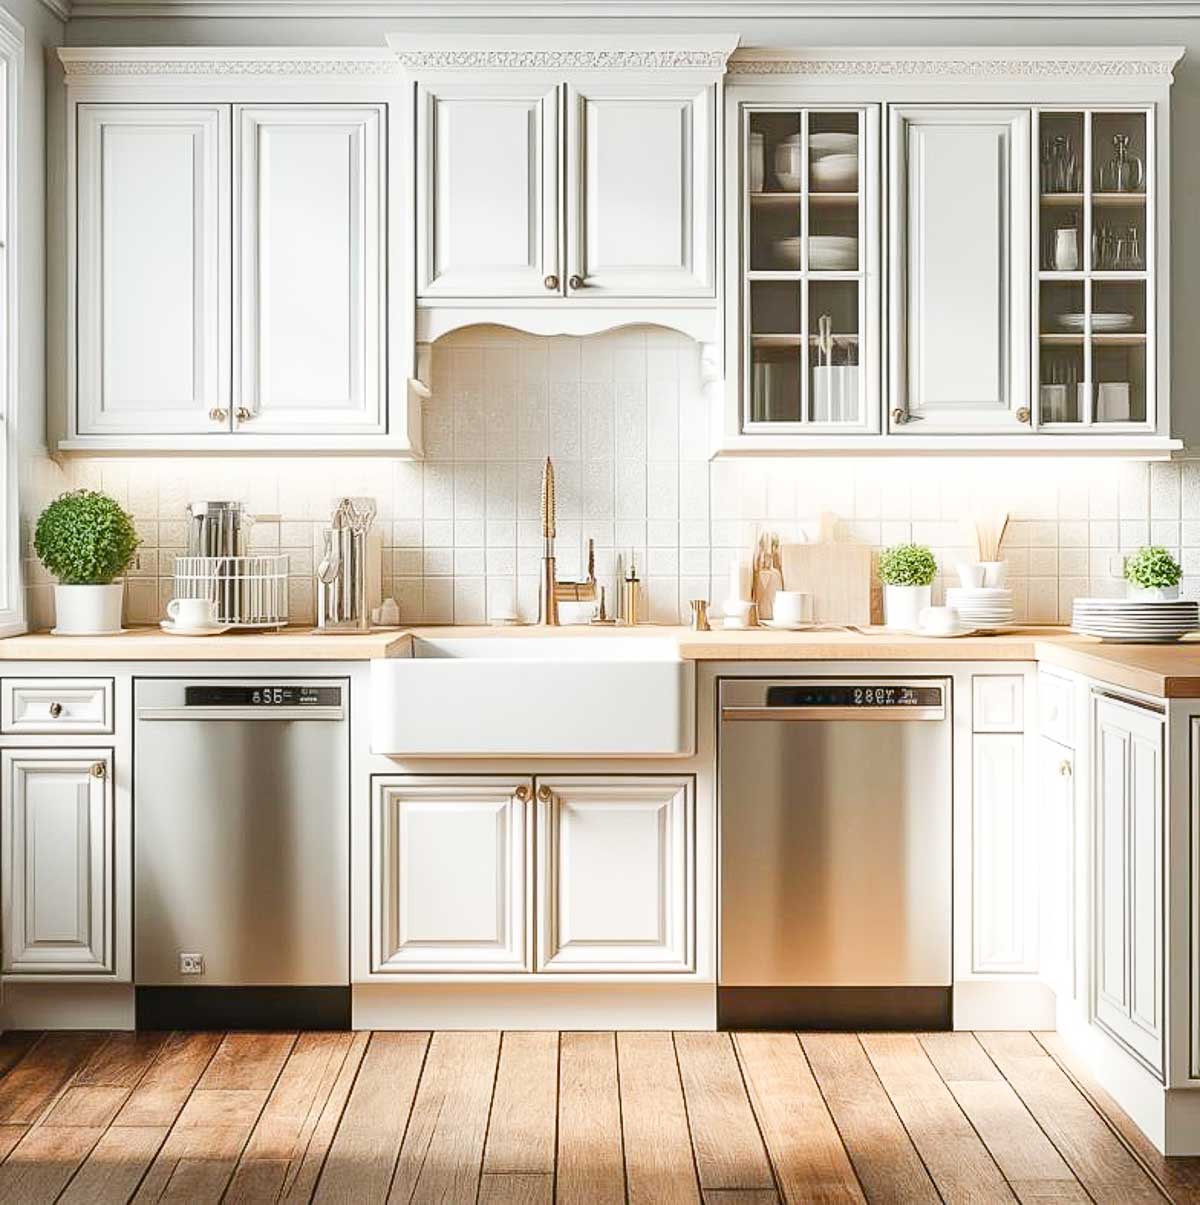 a stainless steel dishwasher on each side of a farmhouse sink in a kitchen with white cabinets and hardwood floors.